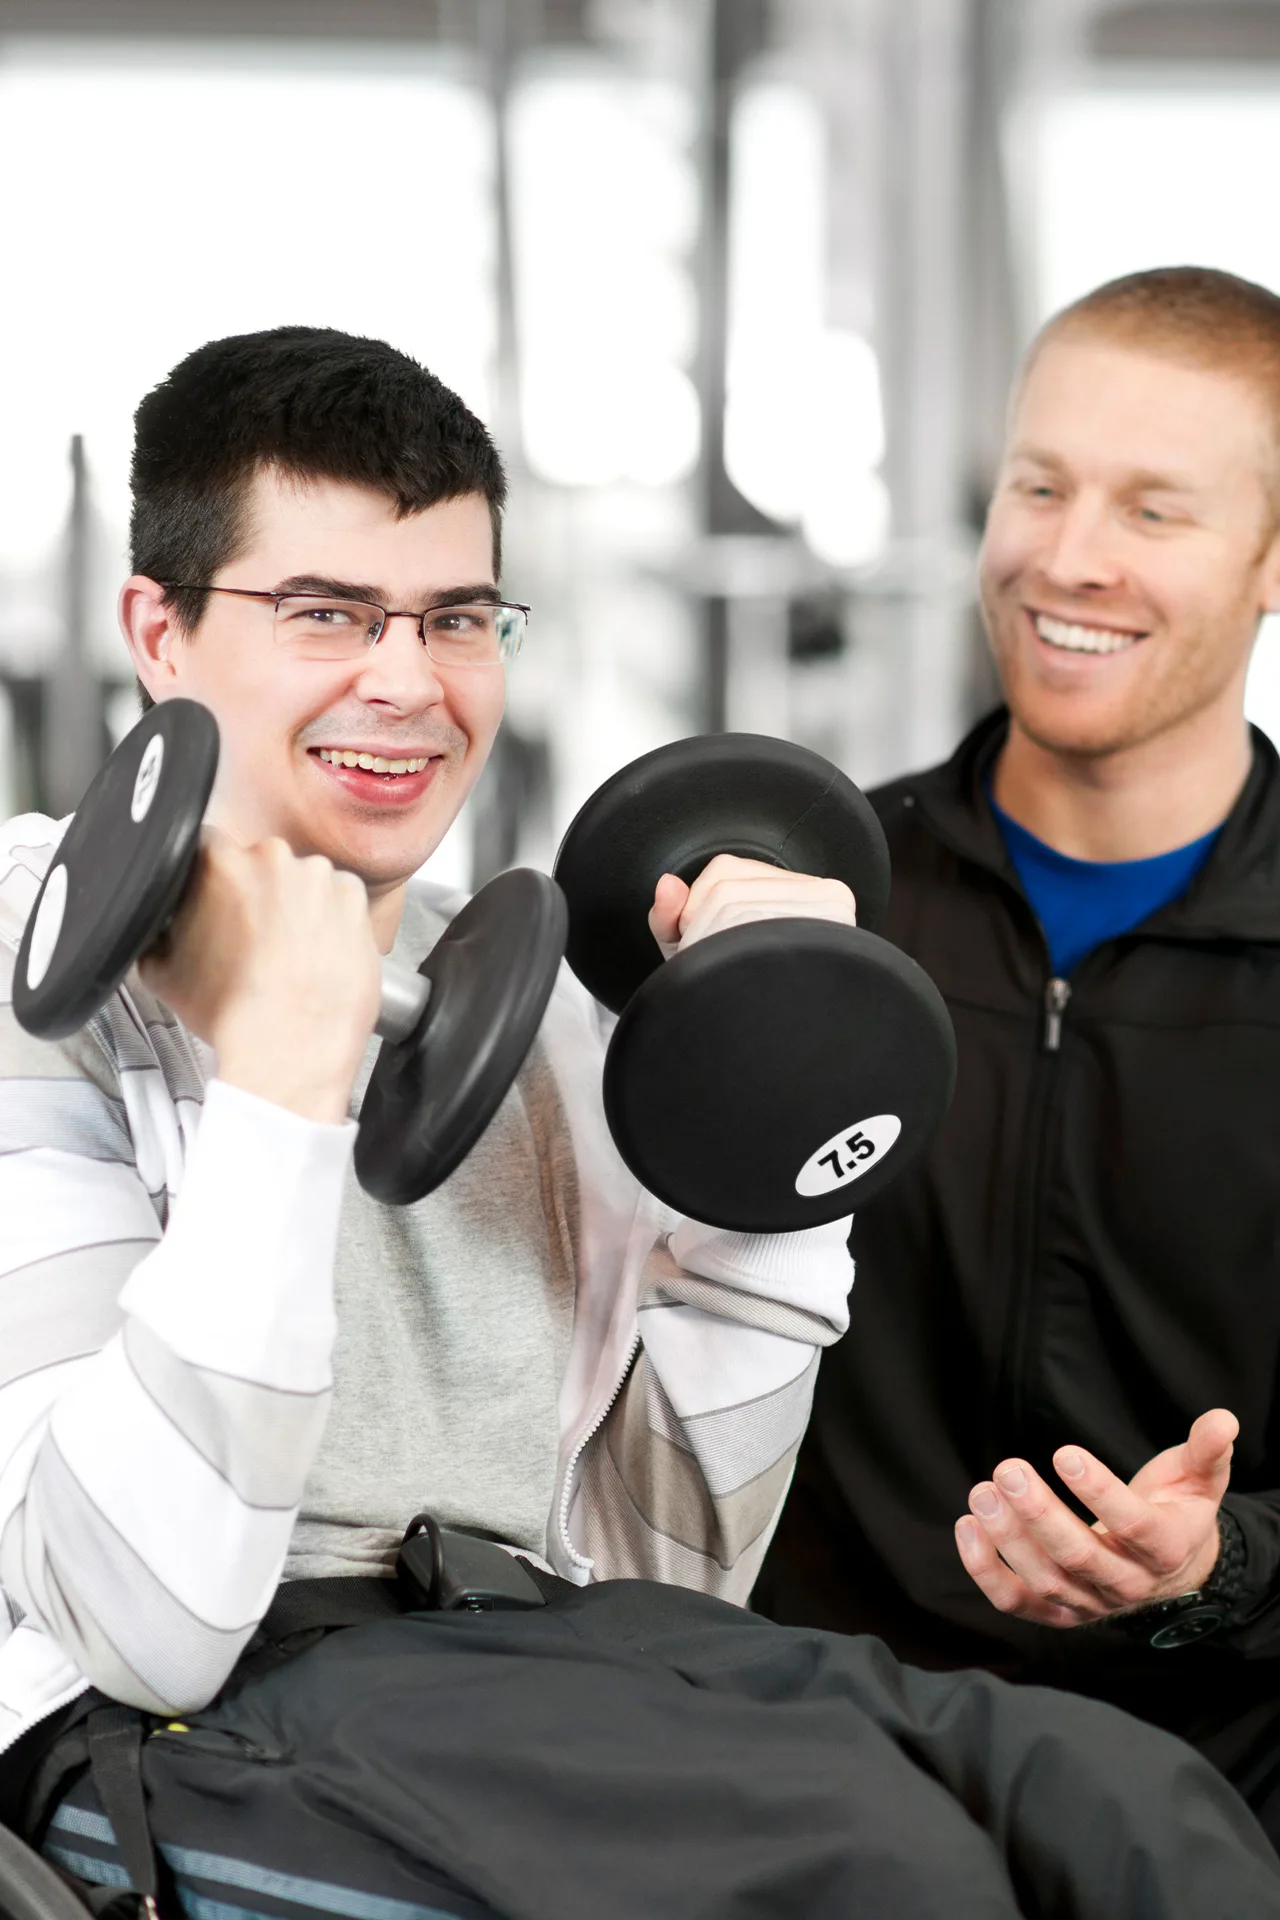 A man using a wheelchair exercises with a personal trainer using dumbbells.